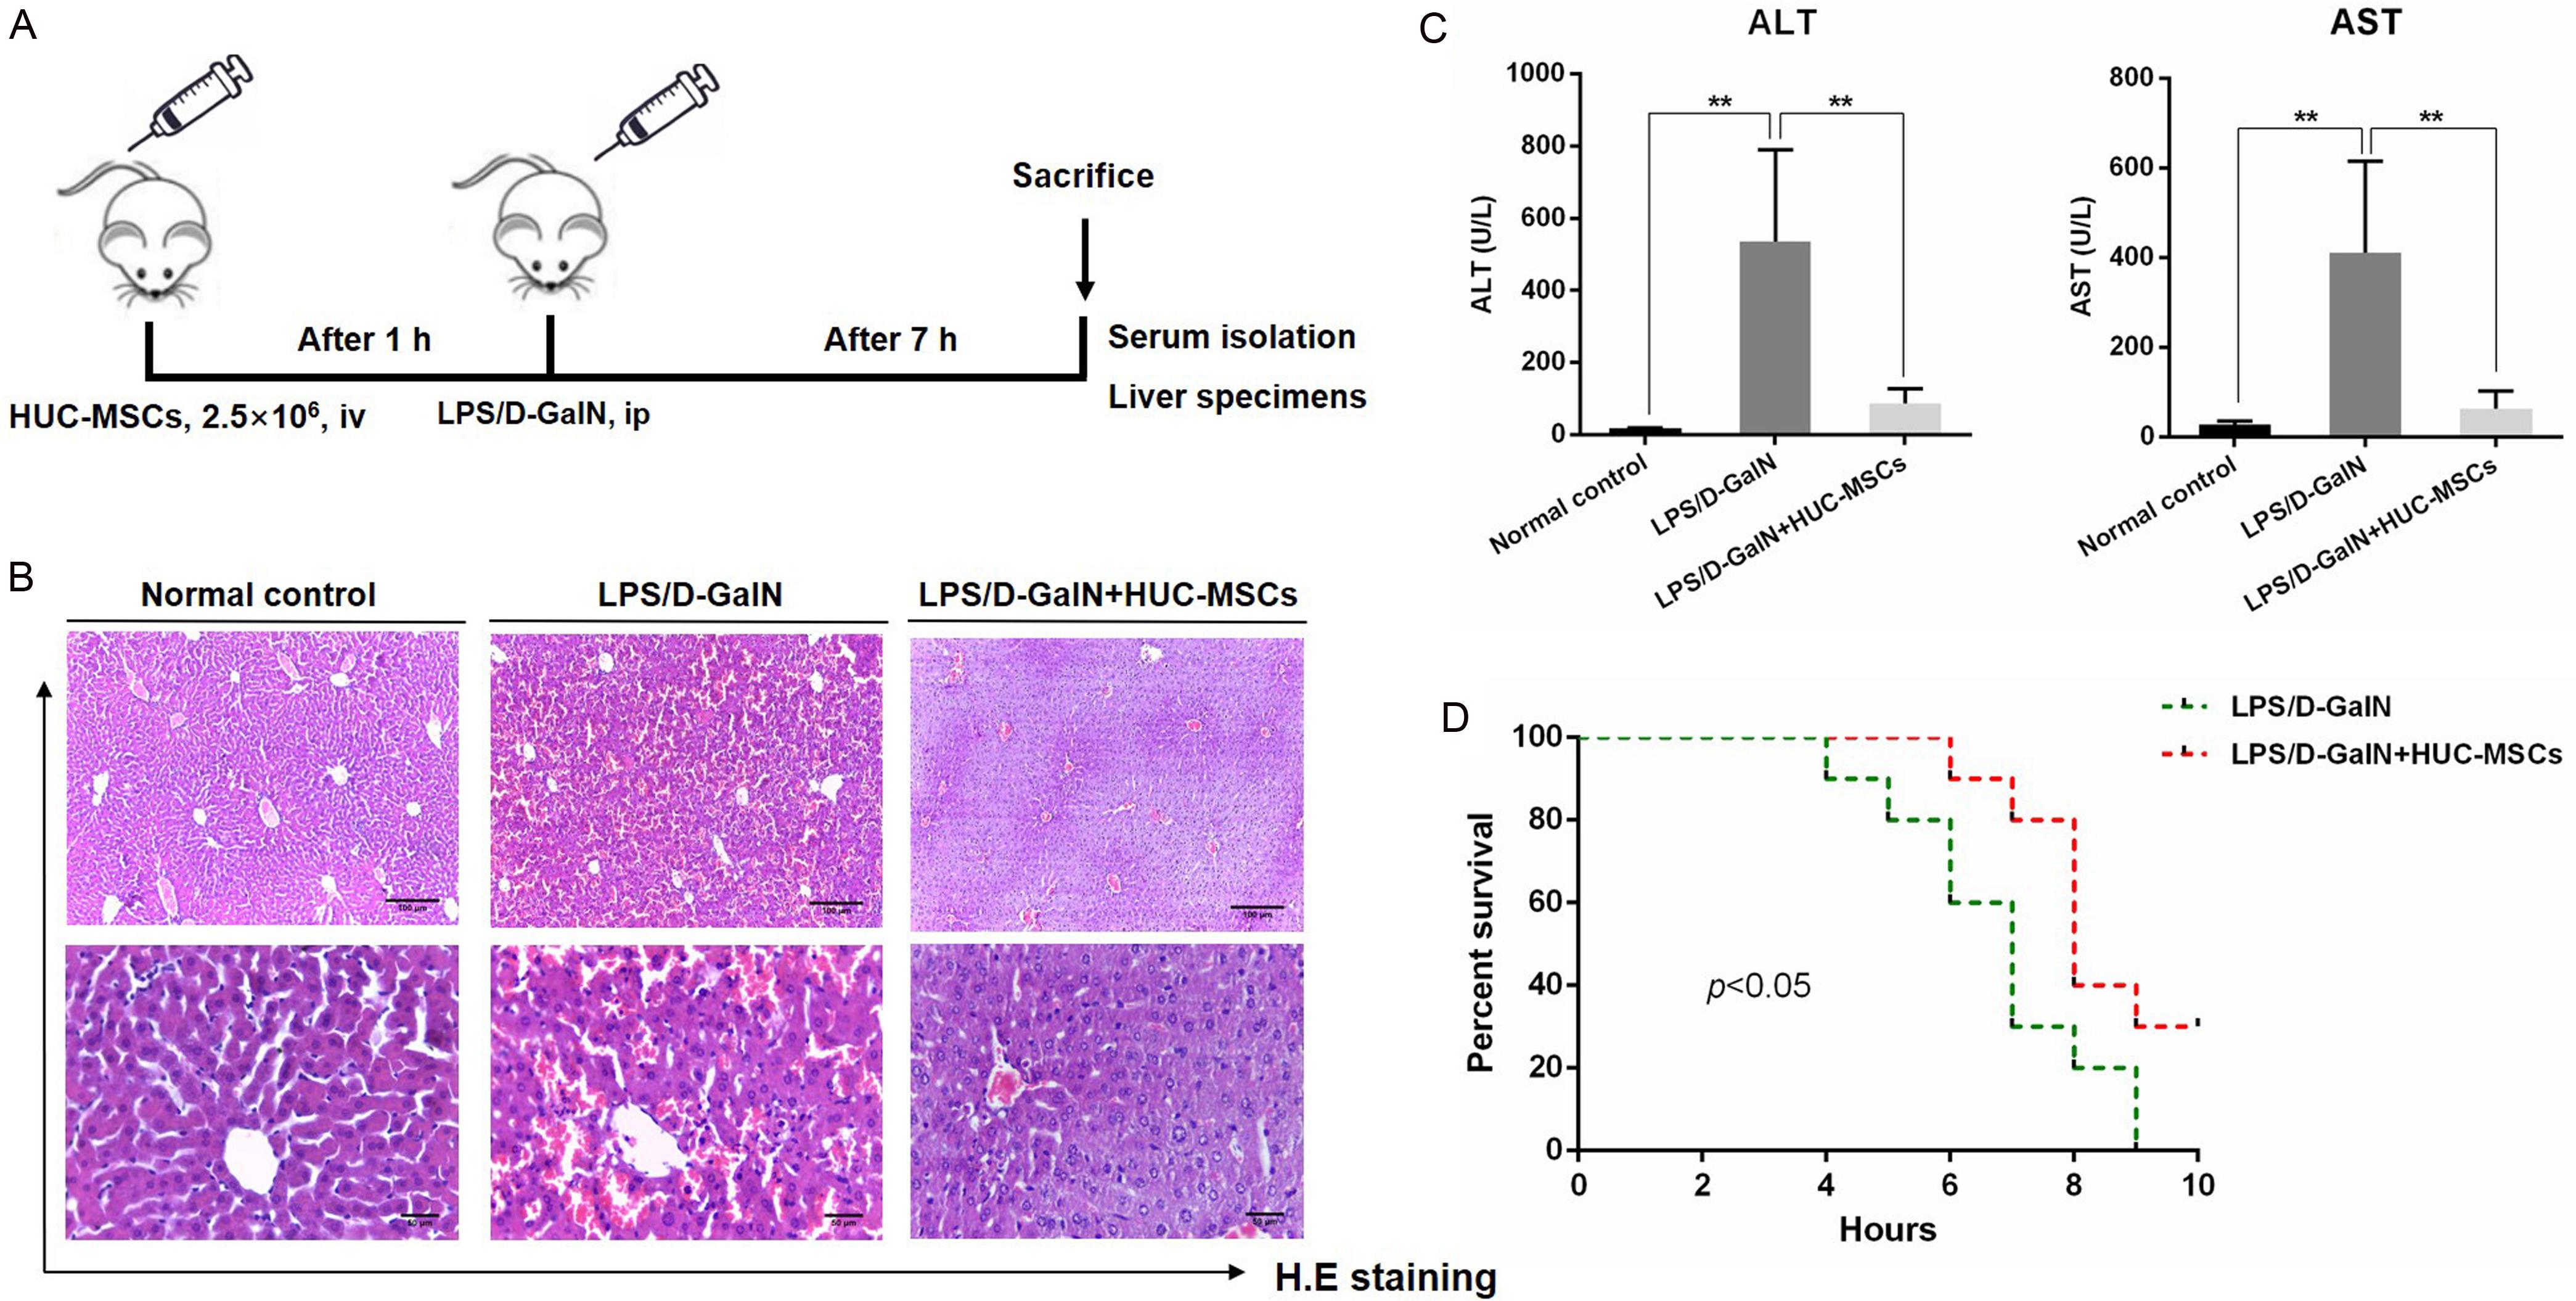 The hUC-MSCs treatment alleviated liver injury in LPS/D-GalN-induced ALF.